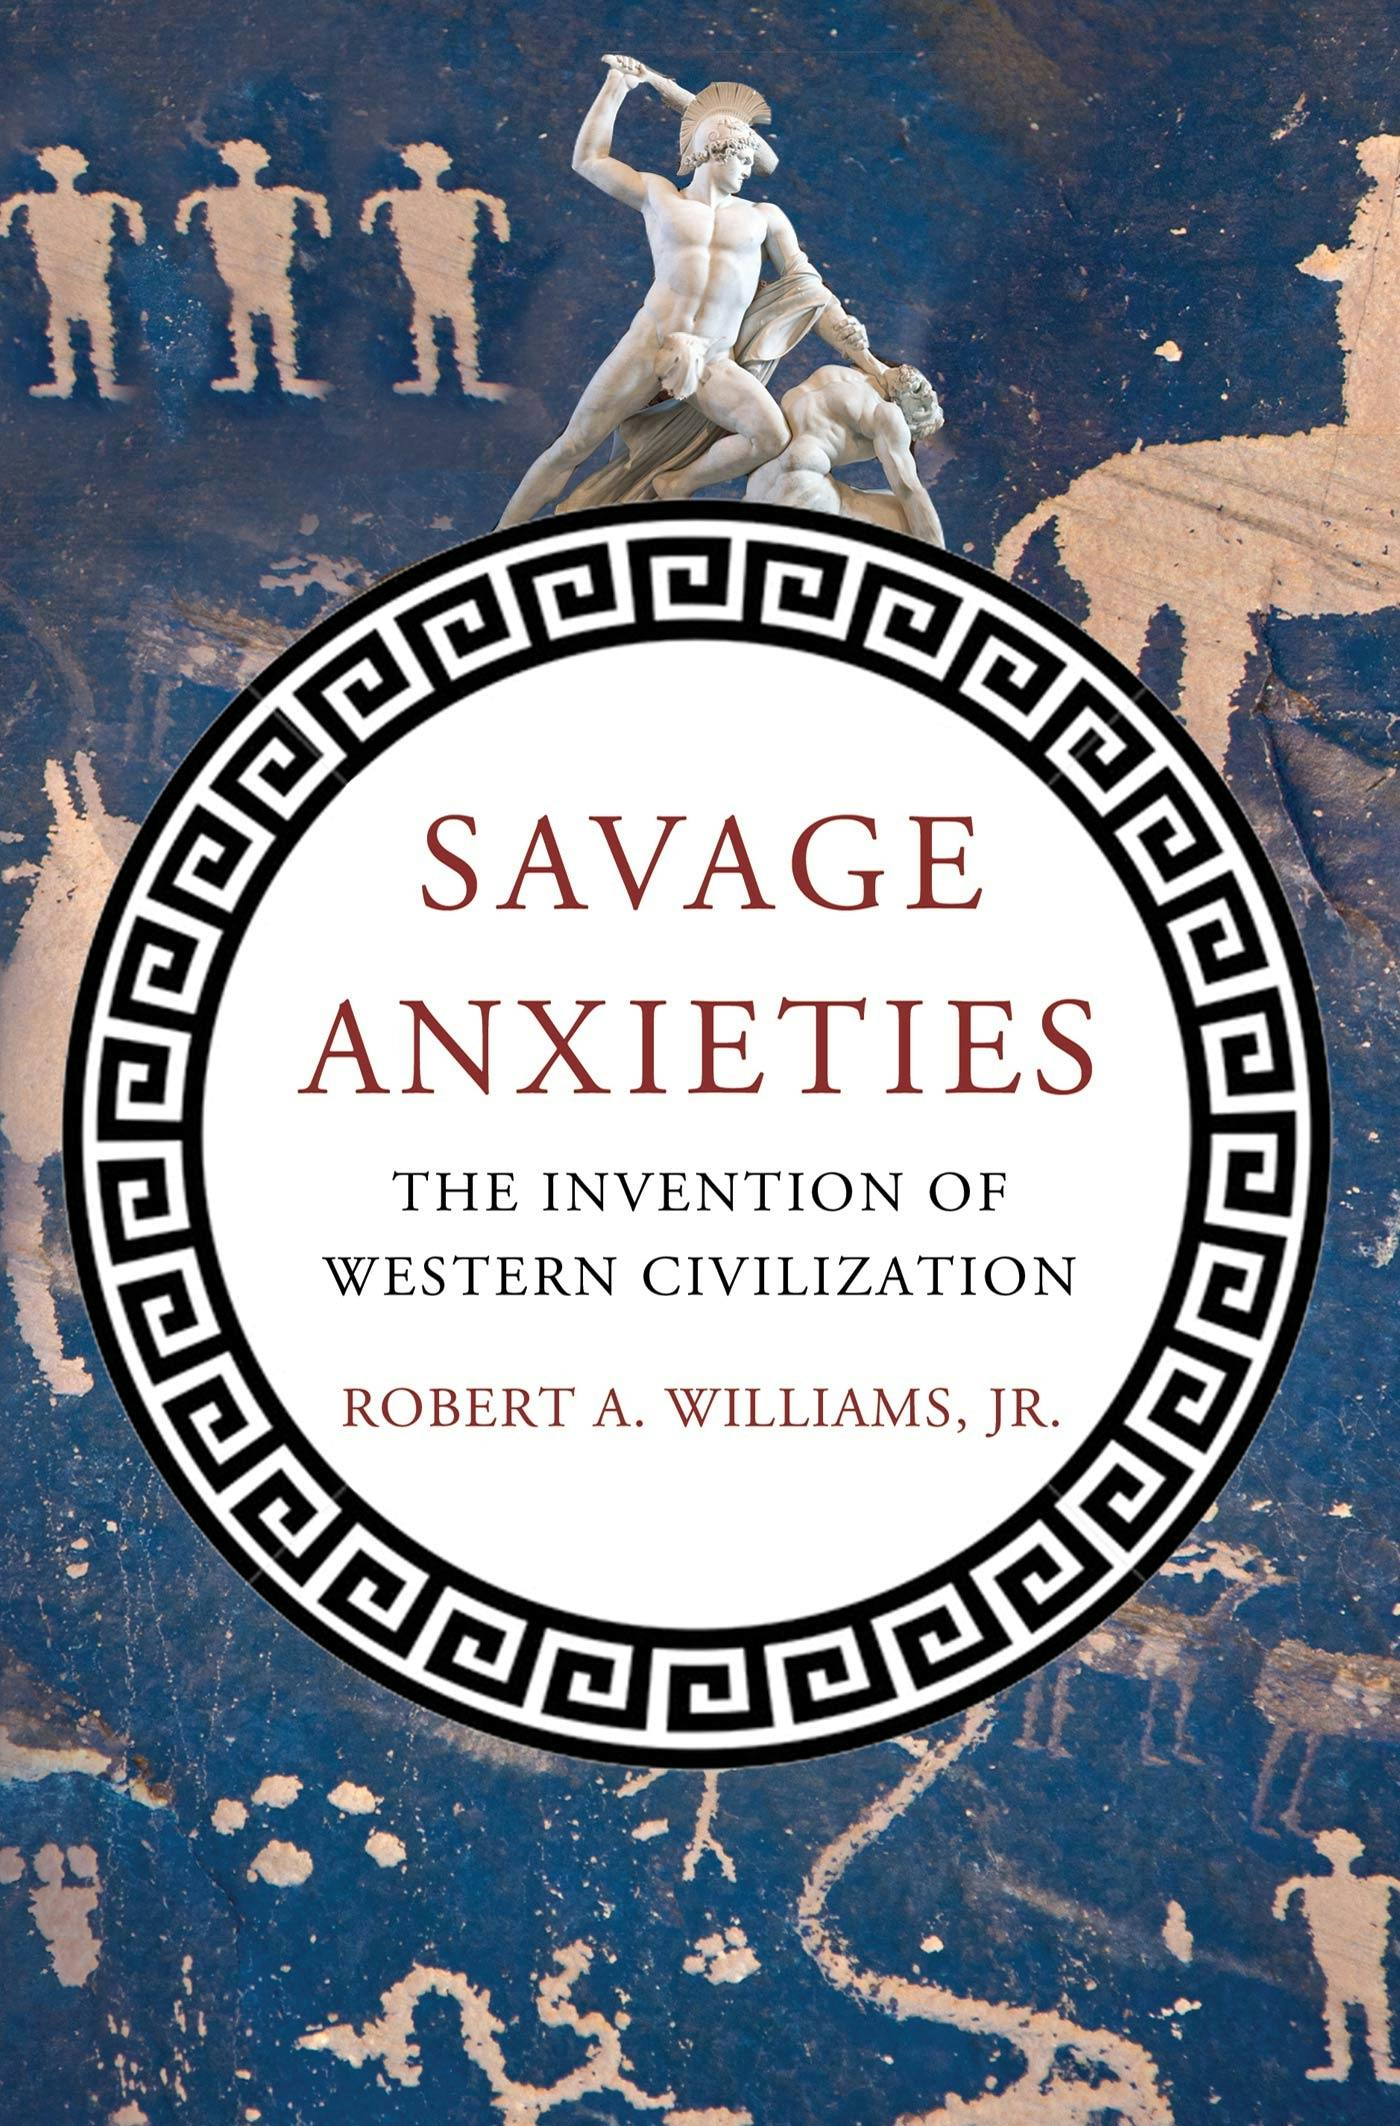 civilization and savagery